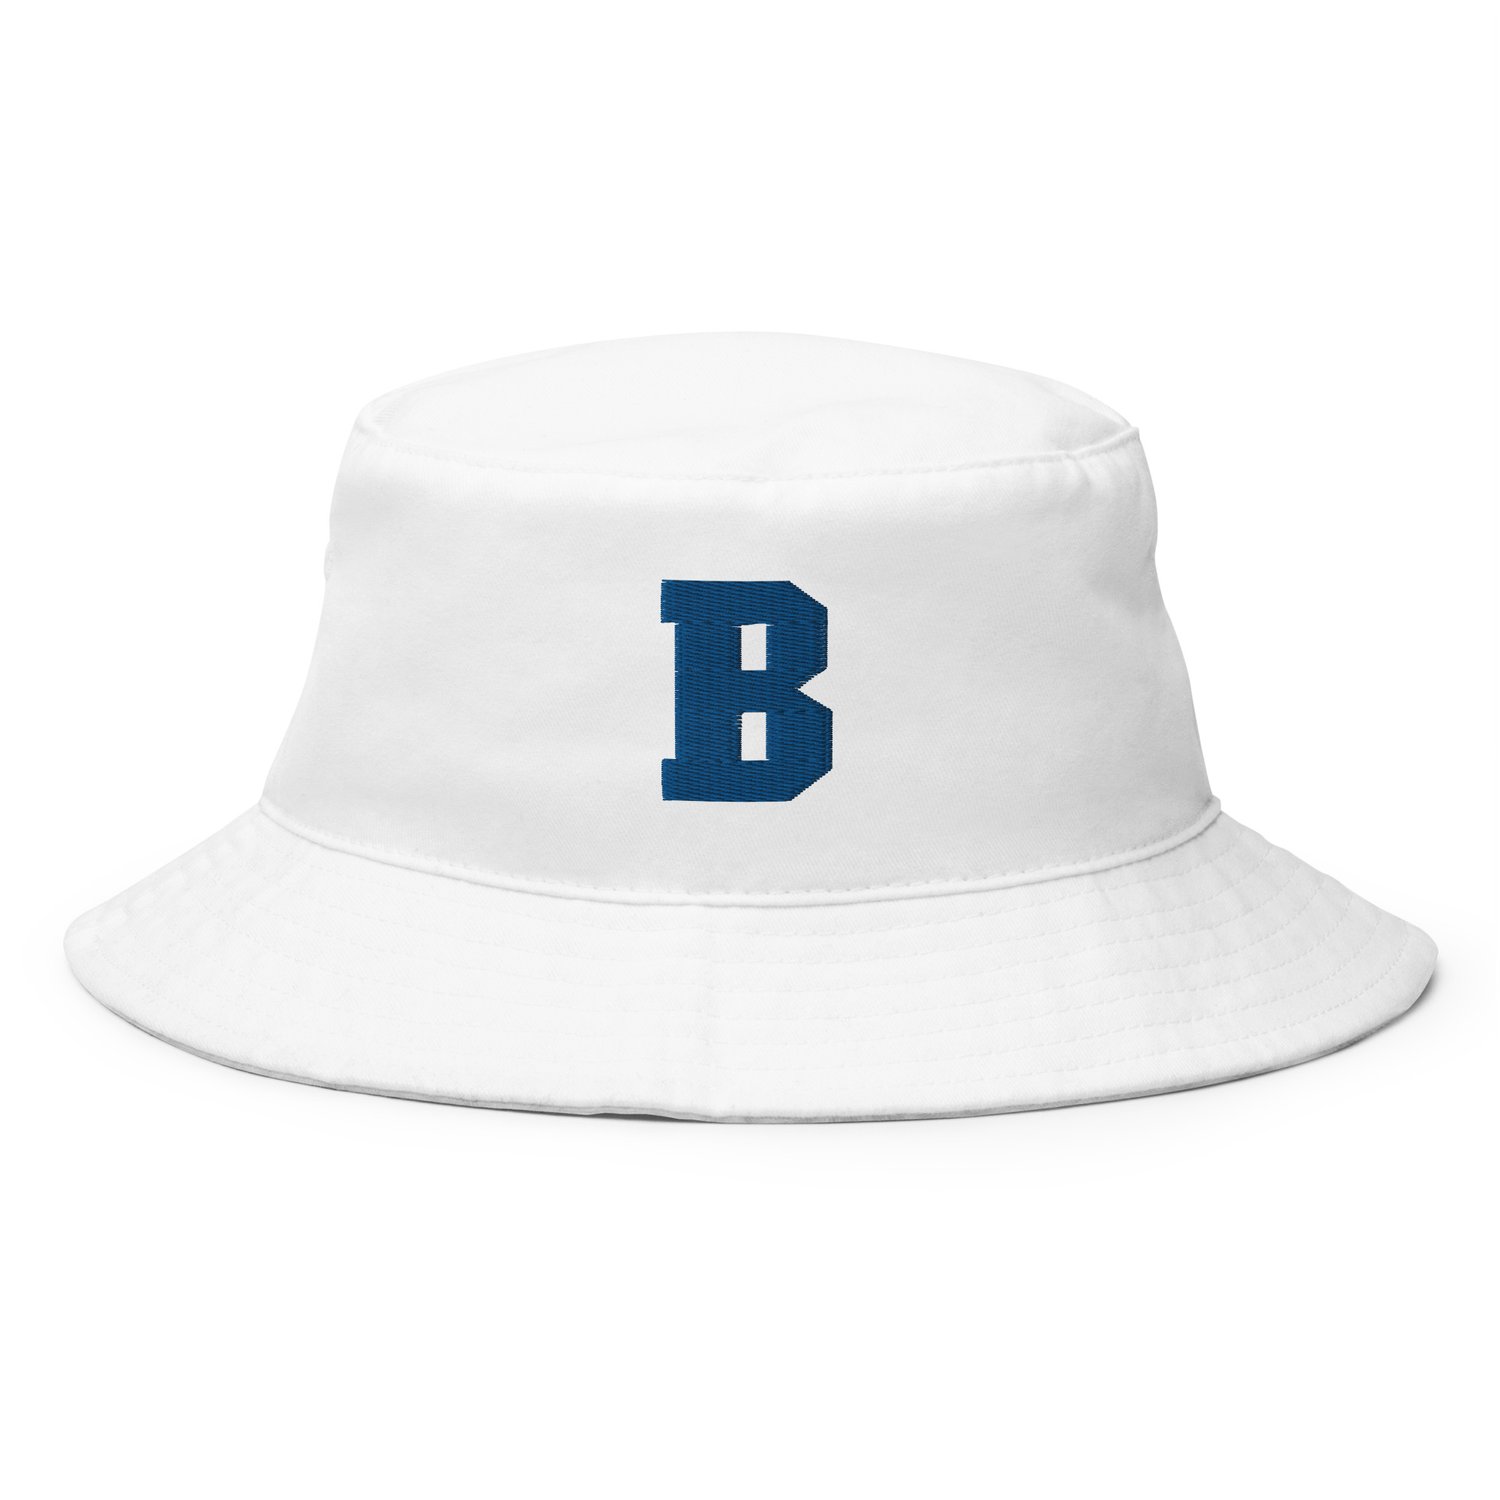 B is for Bucket — BAY (Embroidered) ASSOCIATION ROCKETS Hat